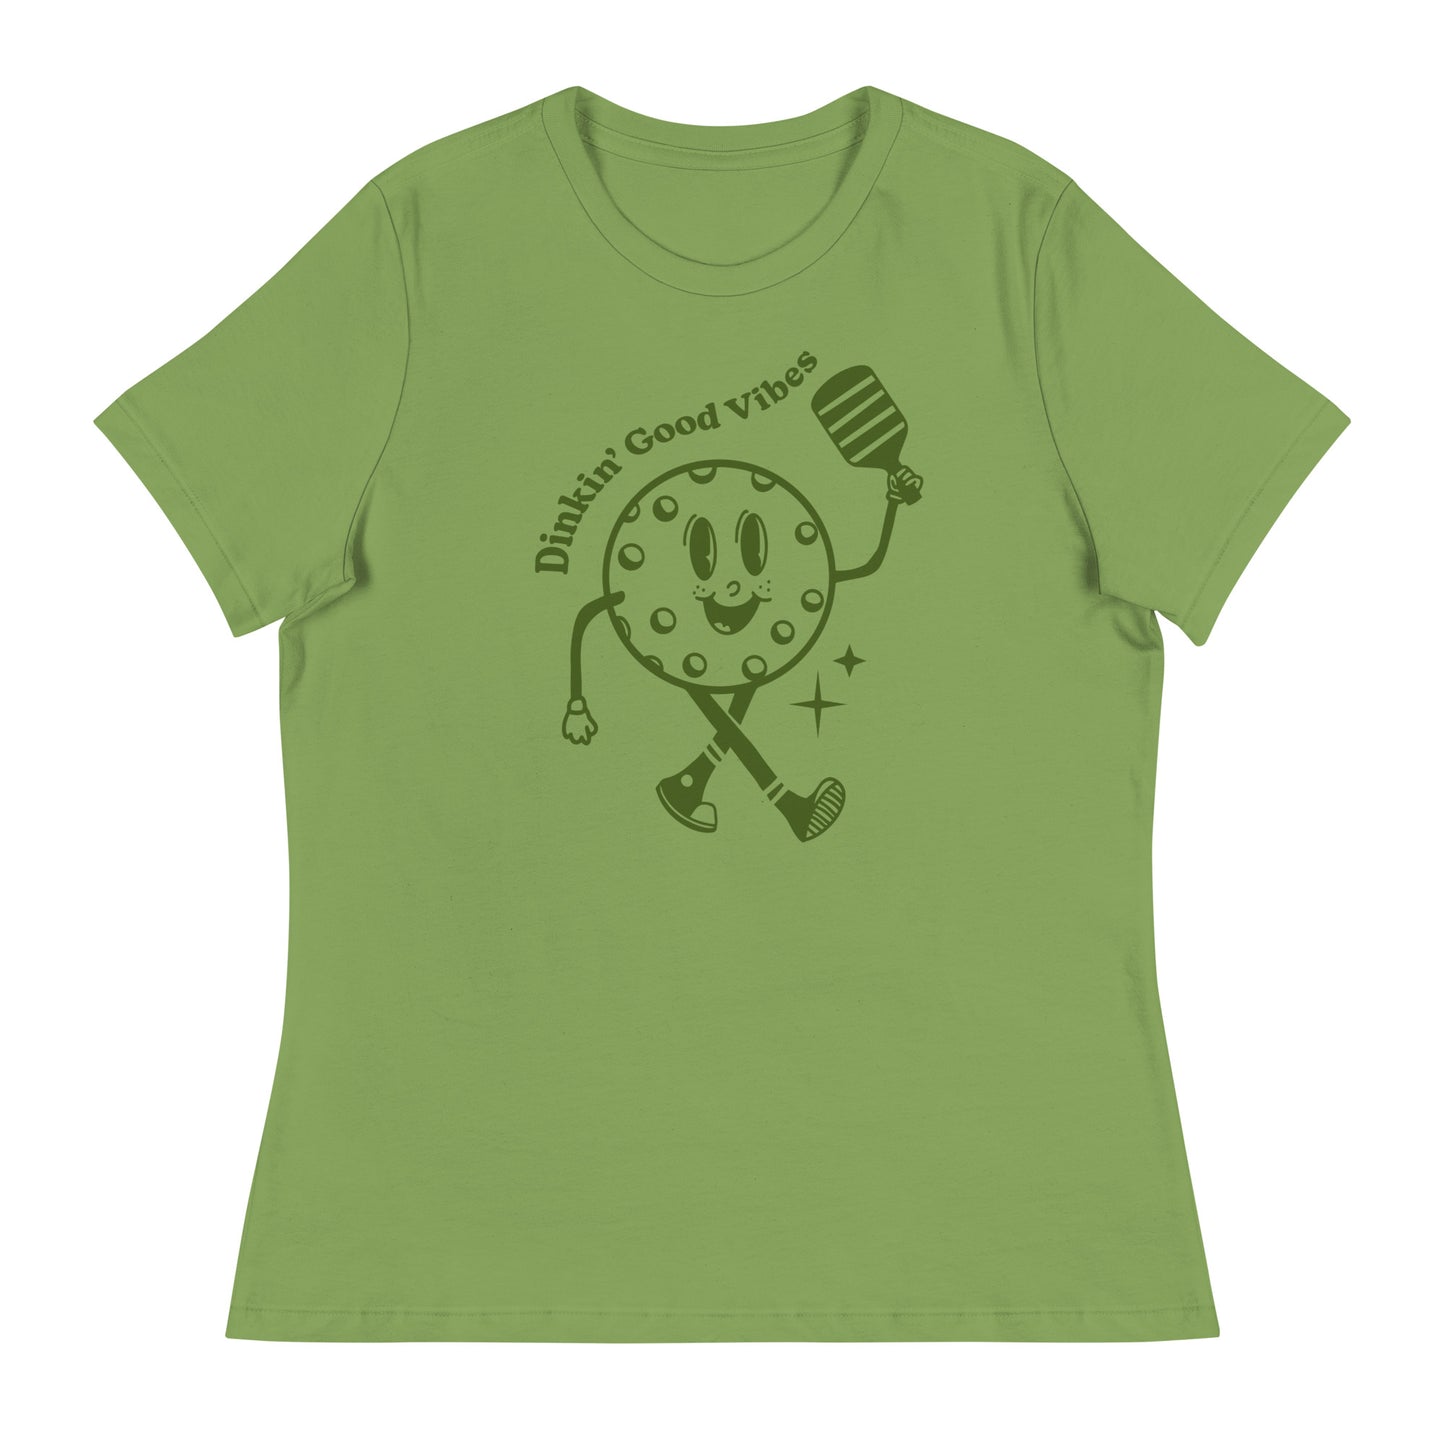 Dinkin' Good Vibes Ladies Pickleball Relaxed Fit Short Sleeve Shirt - Leaf Green